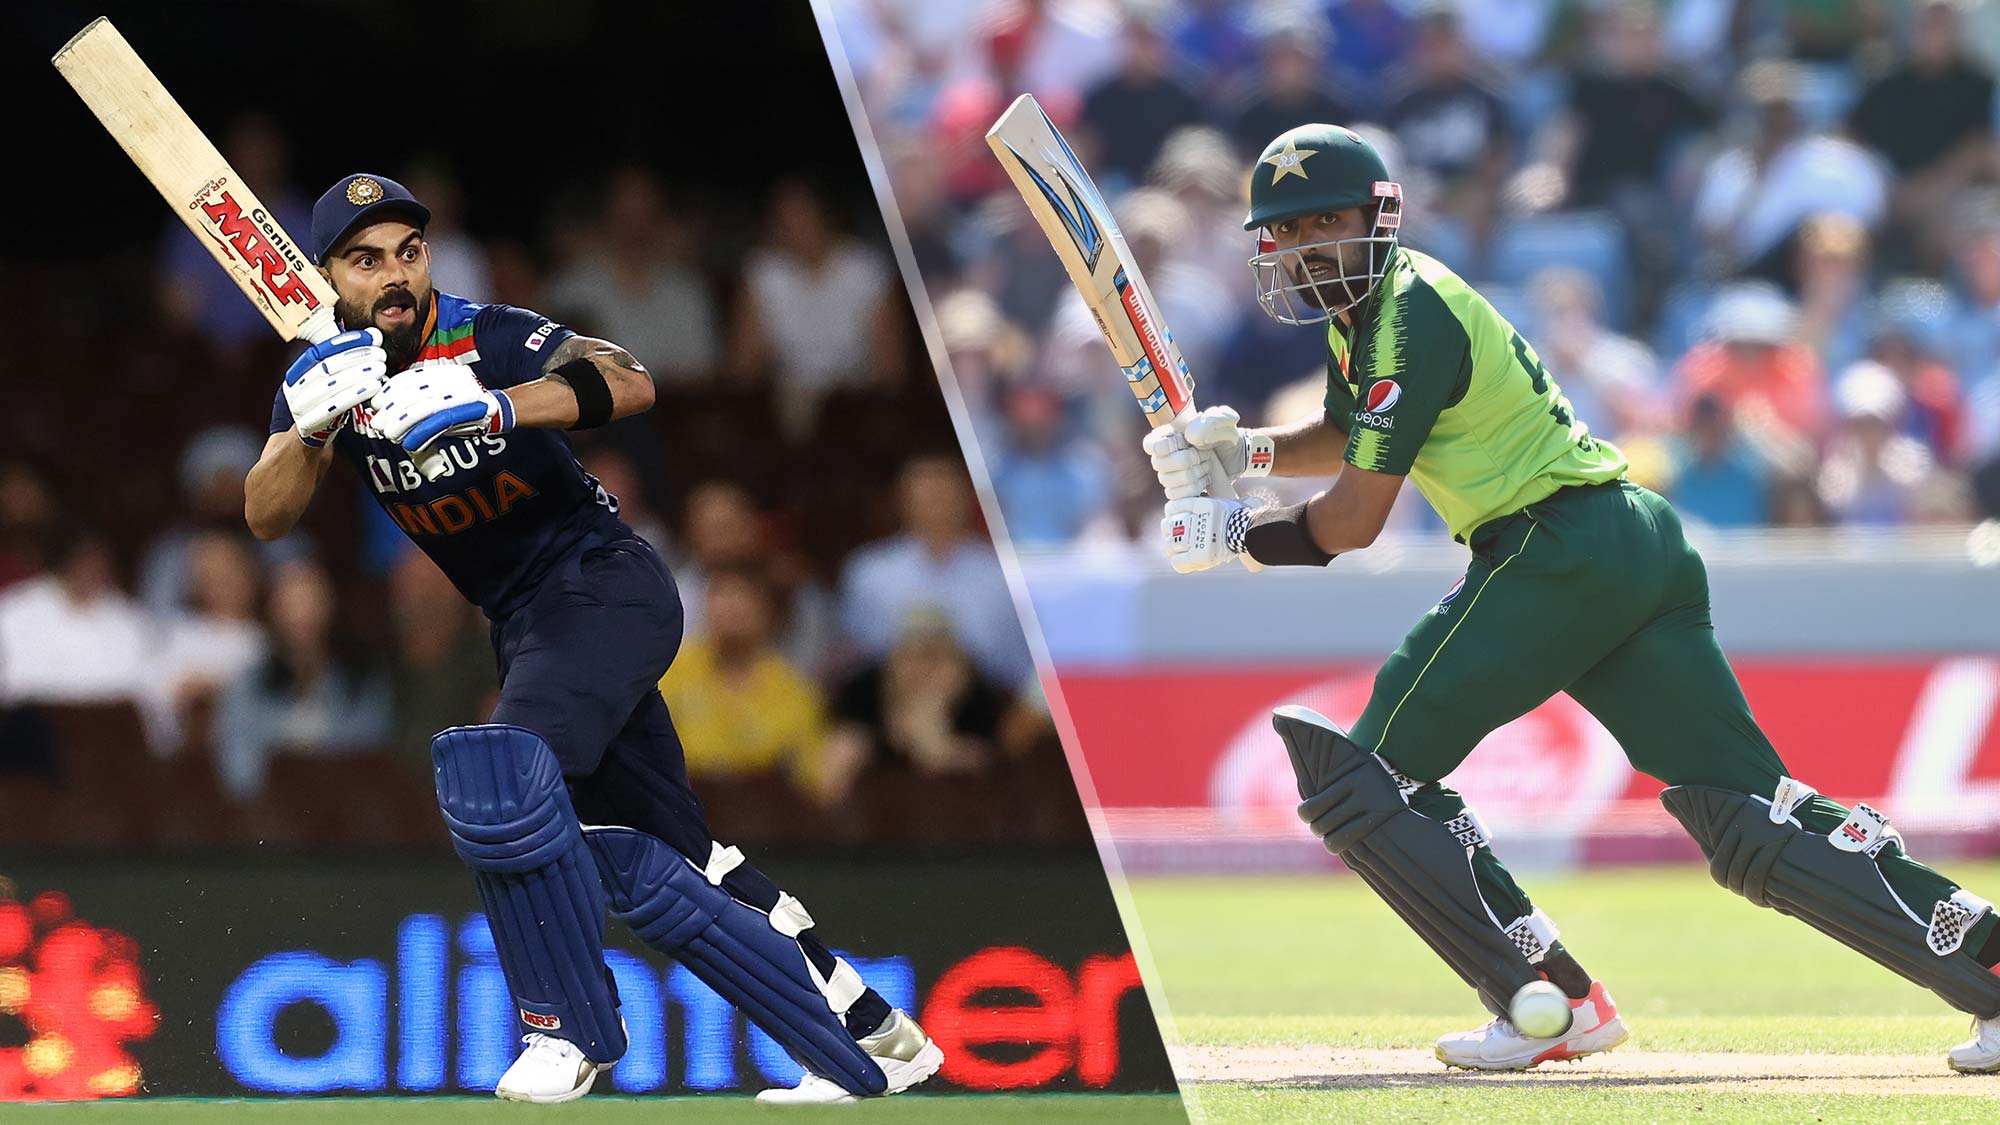 t20 world cup 2021 live streaming online free on mobile